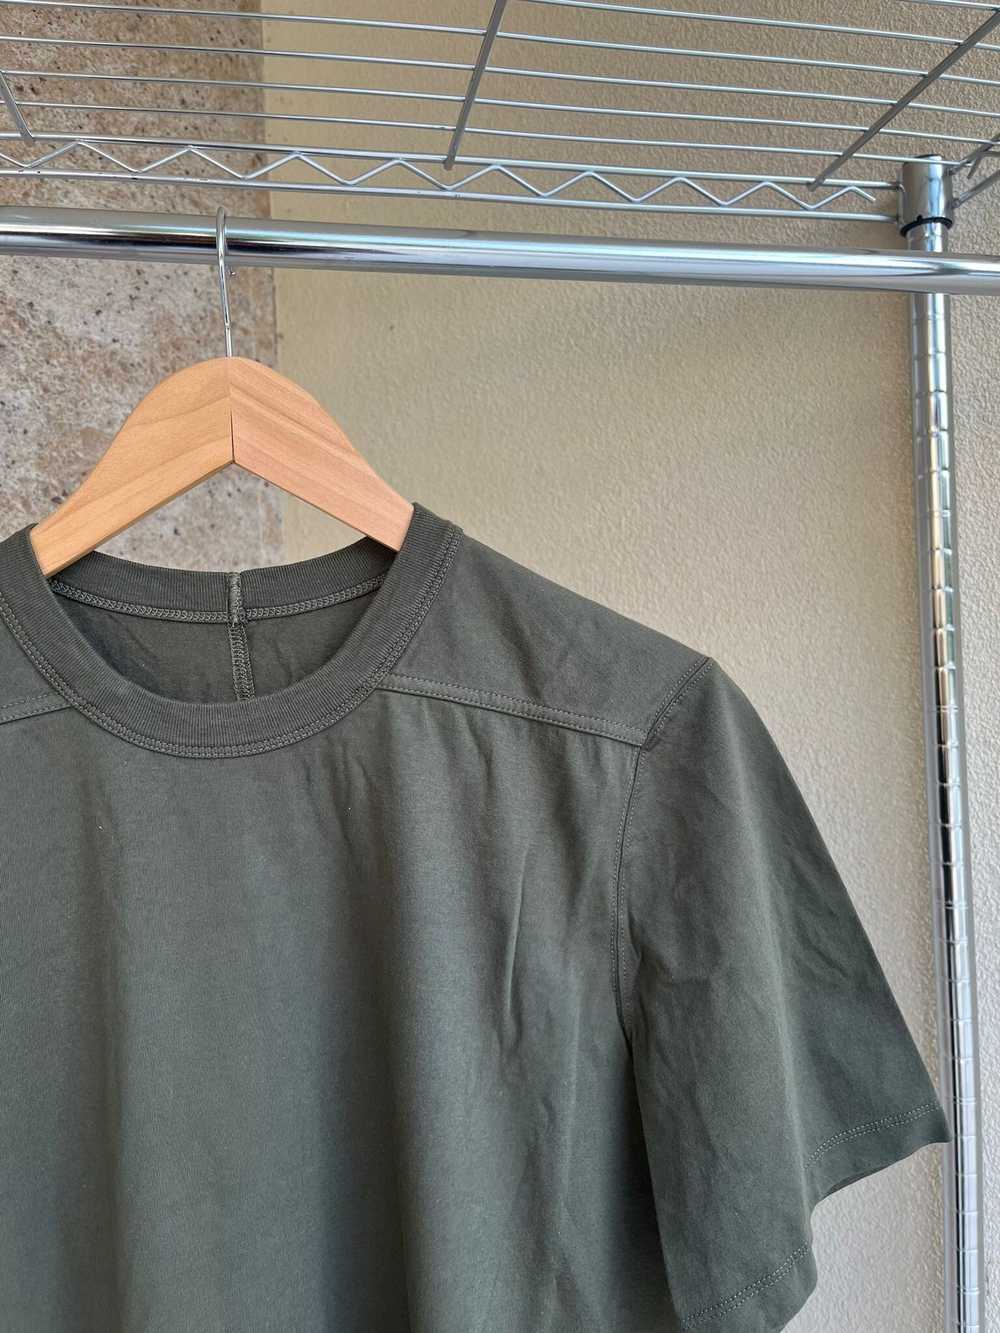 Rick Owens Mainline Level T-Shirt in Green - image 8